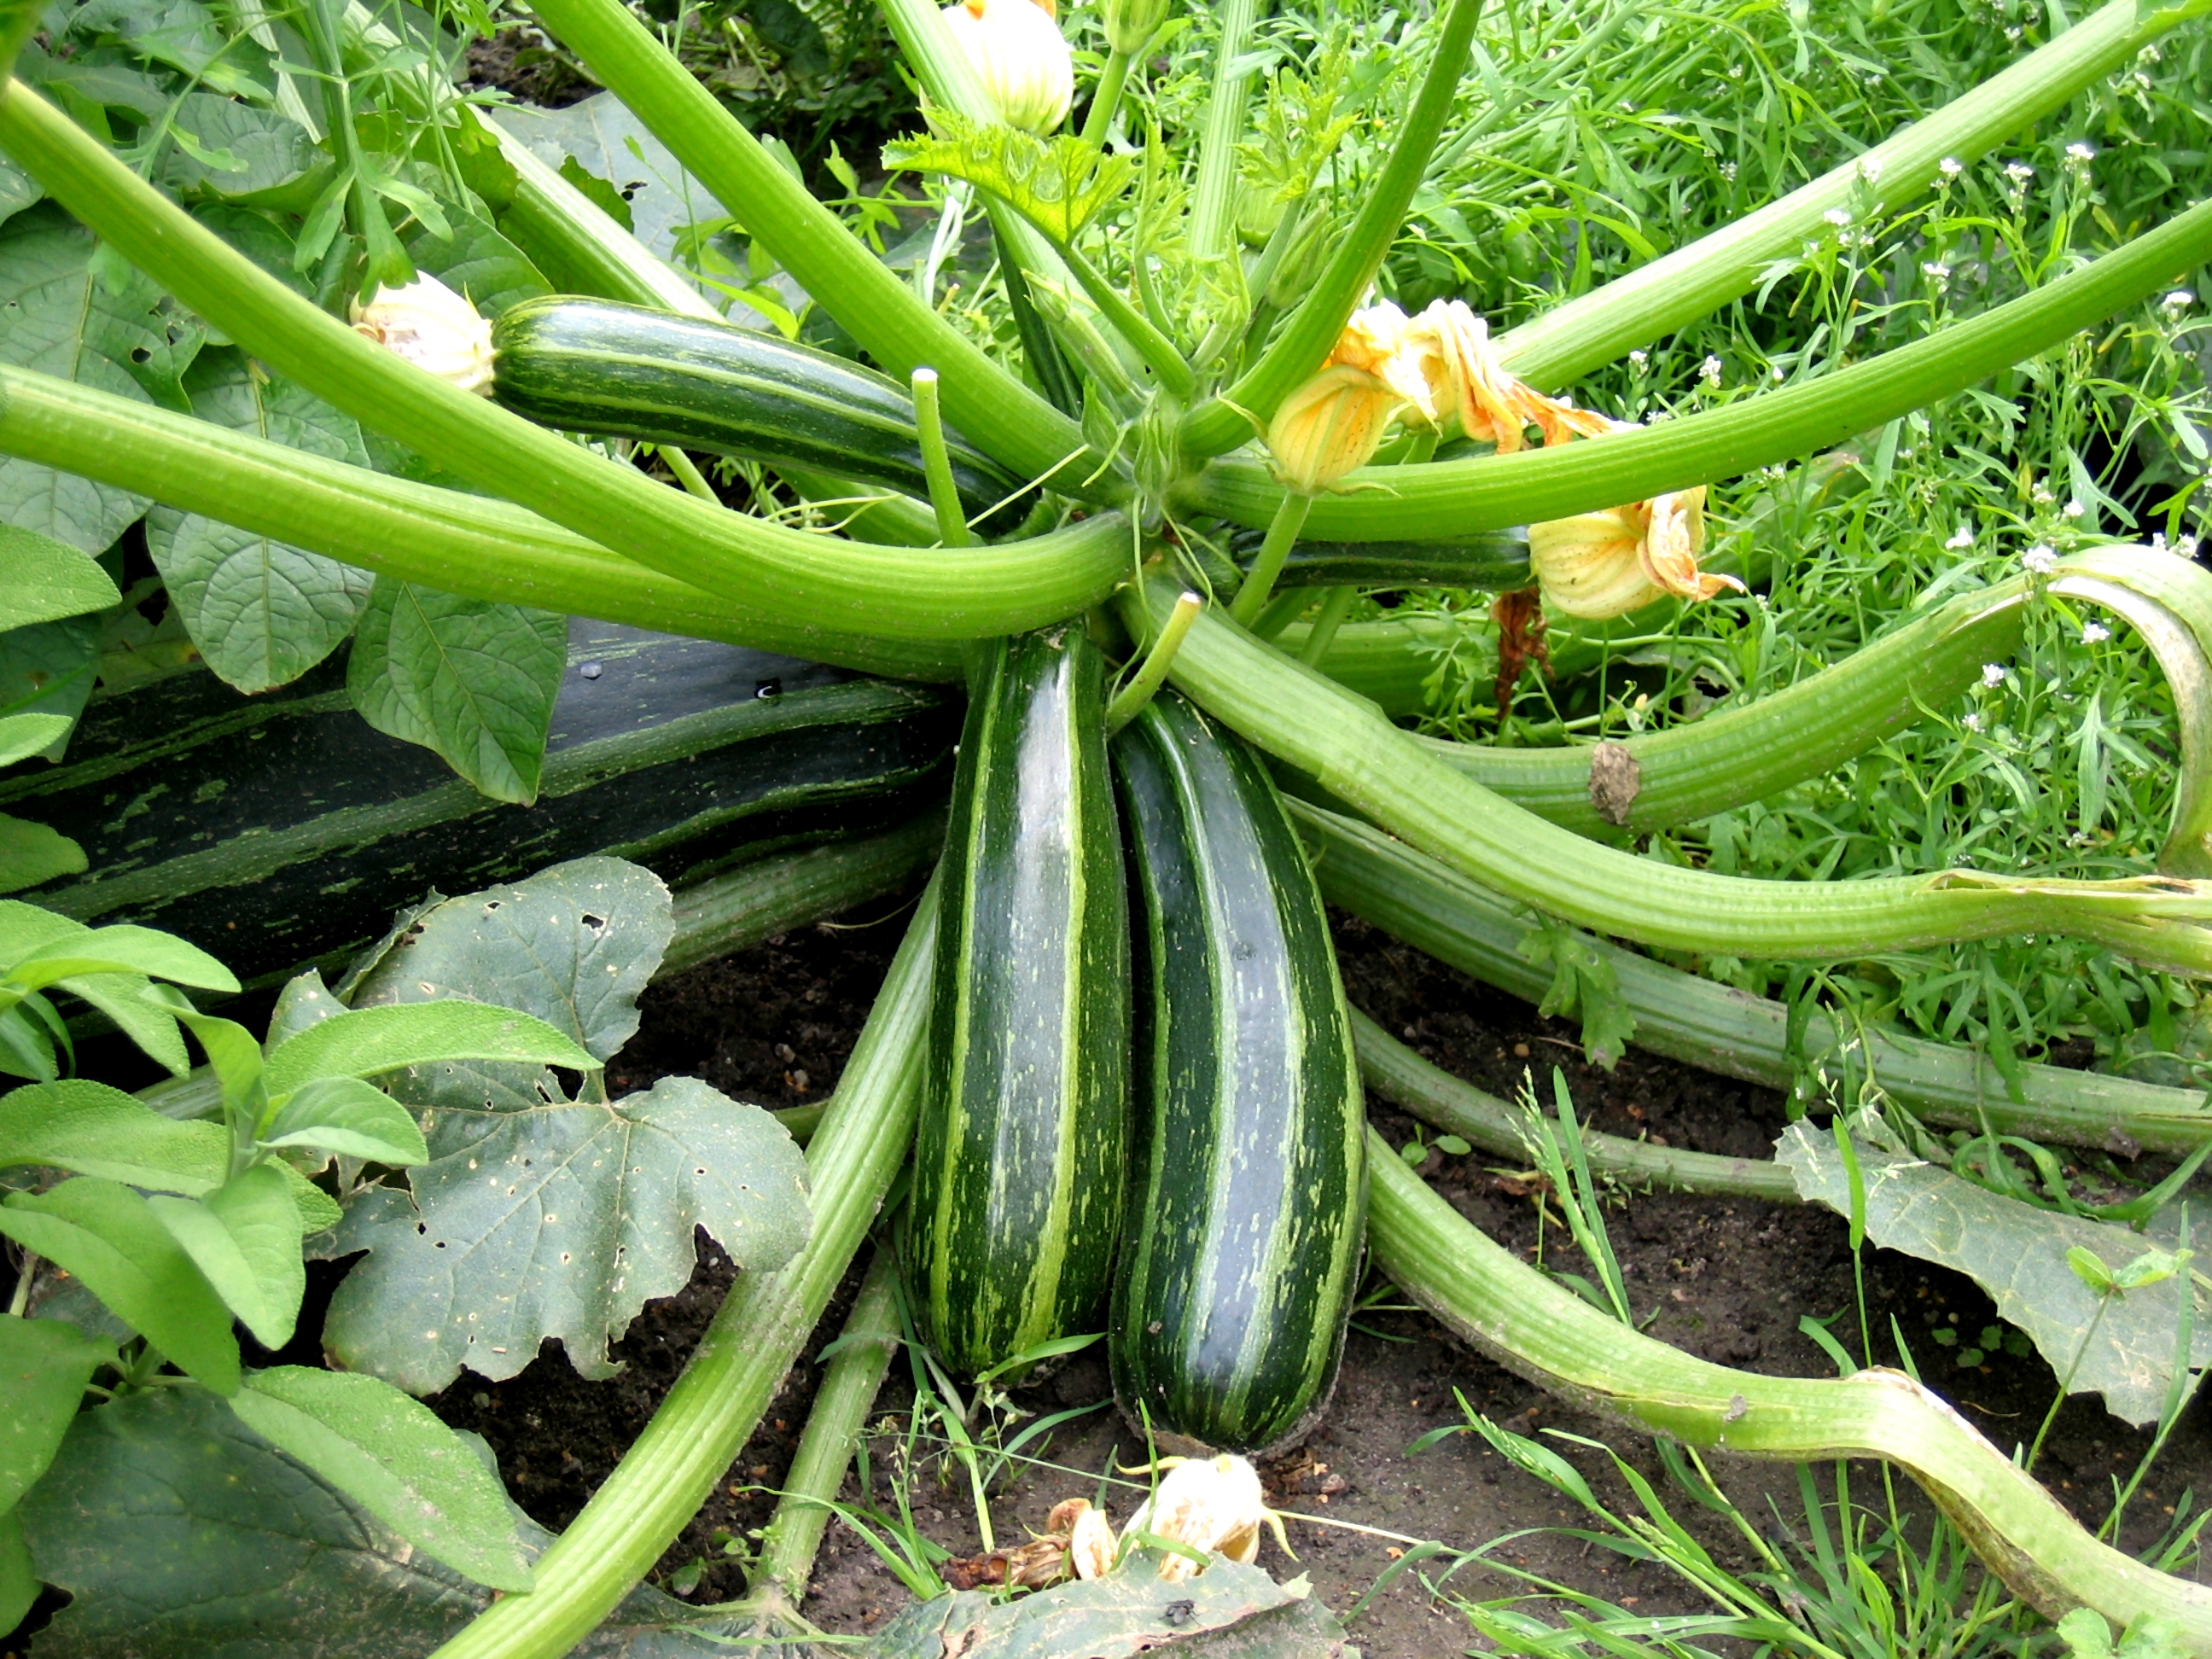 Zucchini Growth Stages: How Fast Does Zucchini Grow? 1